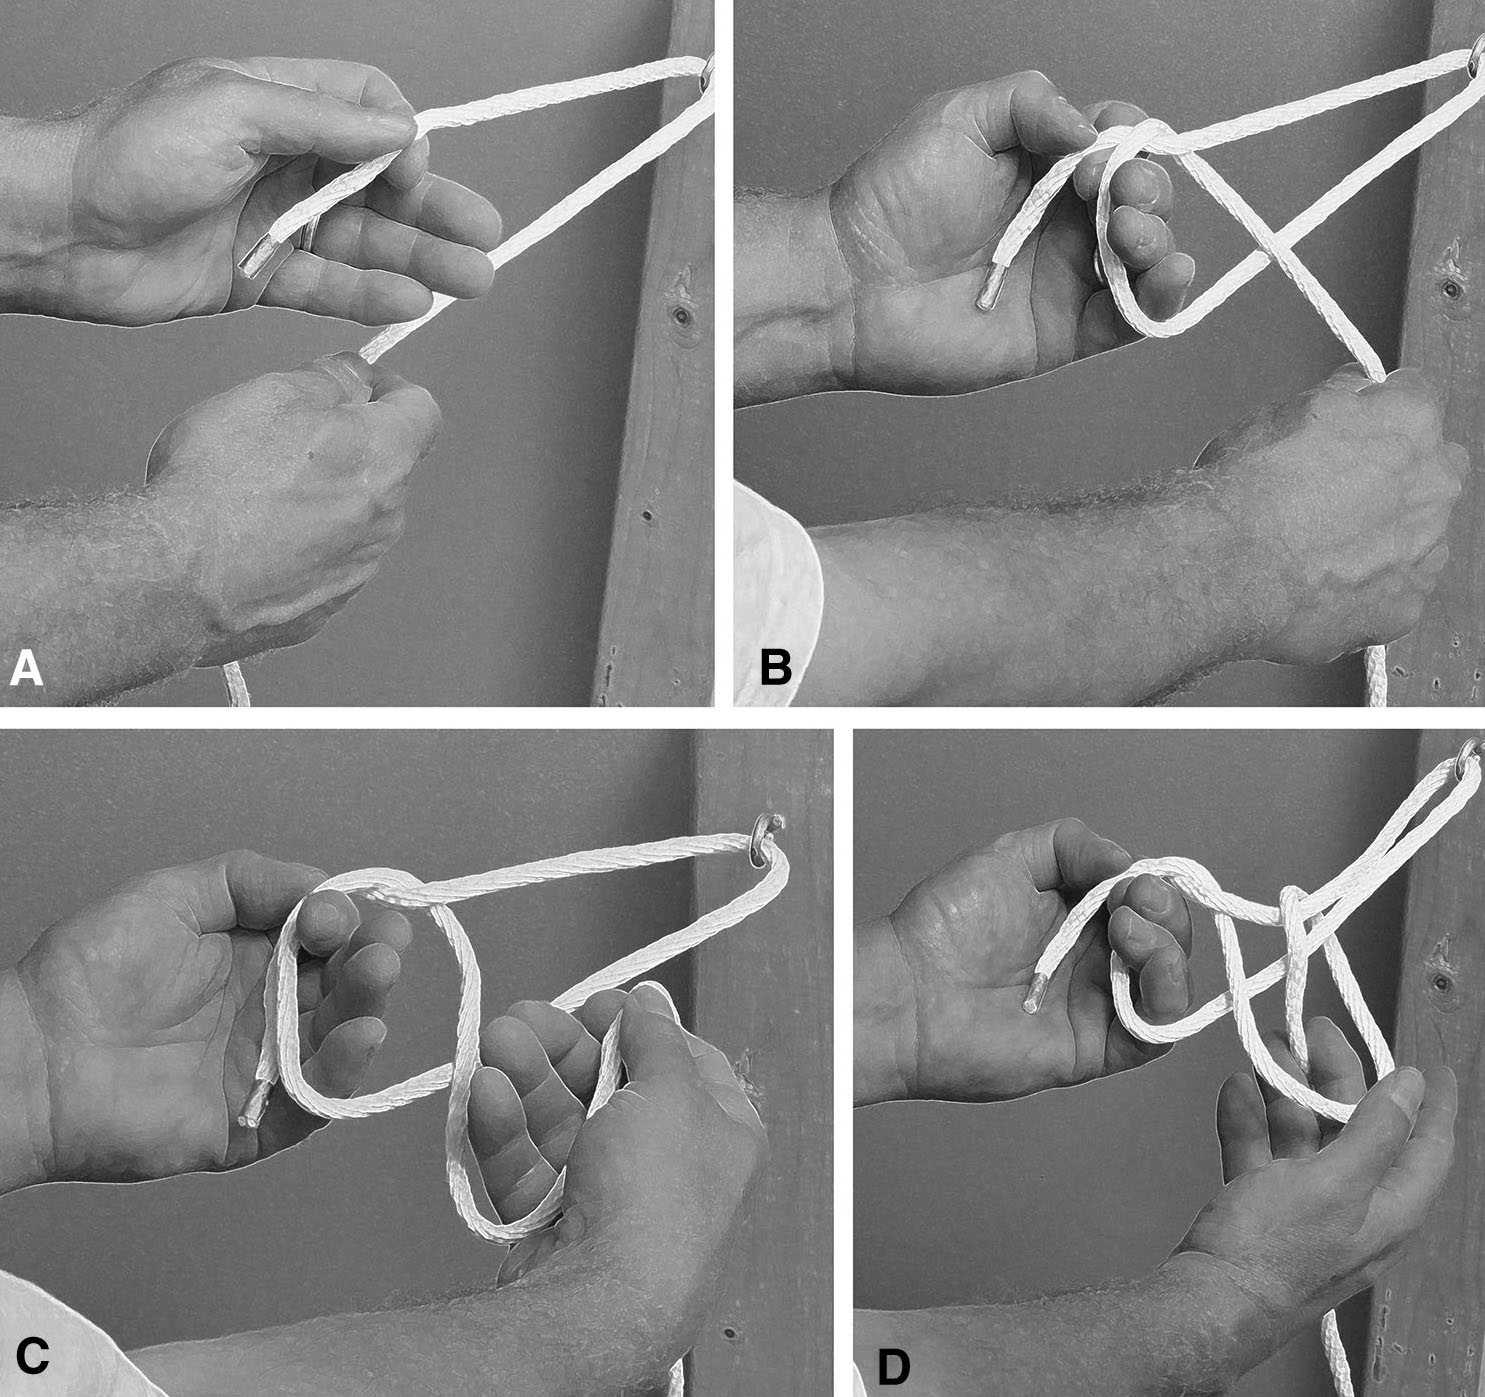 Is Teaching Simple Surgical Skills Using an Operant Learning Program More Effective Than Teaching by Demonstration?